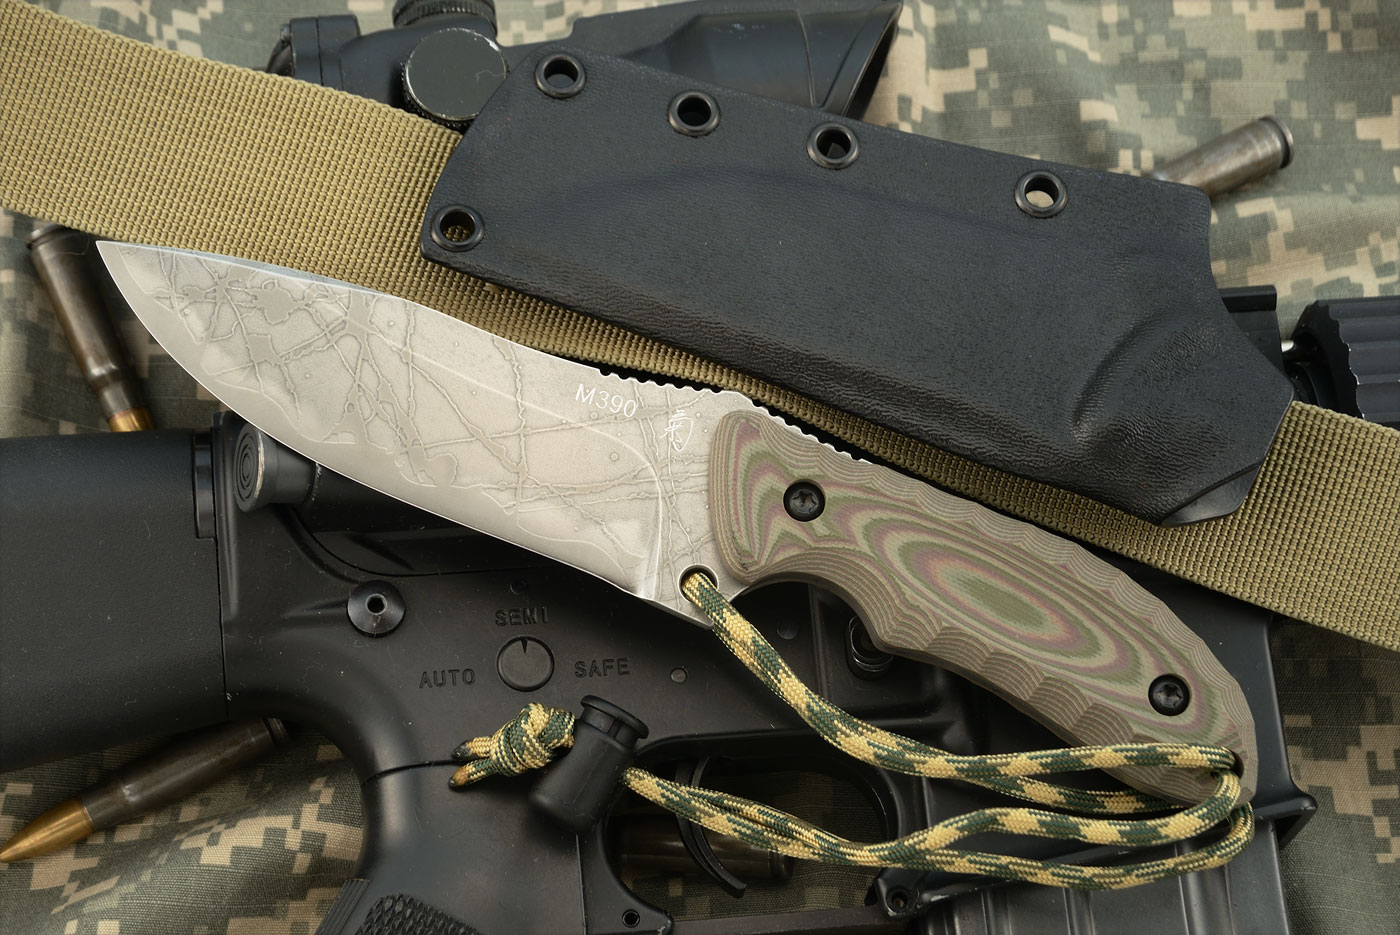 Aoba Field Knife with Camo G-10 (M390)